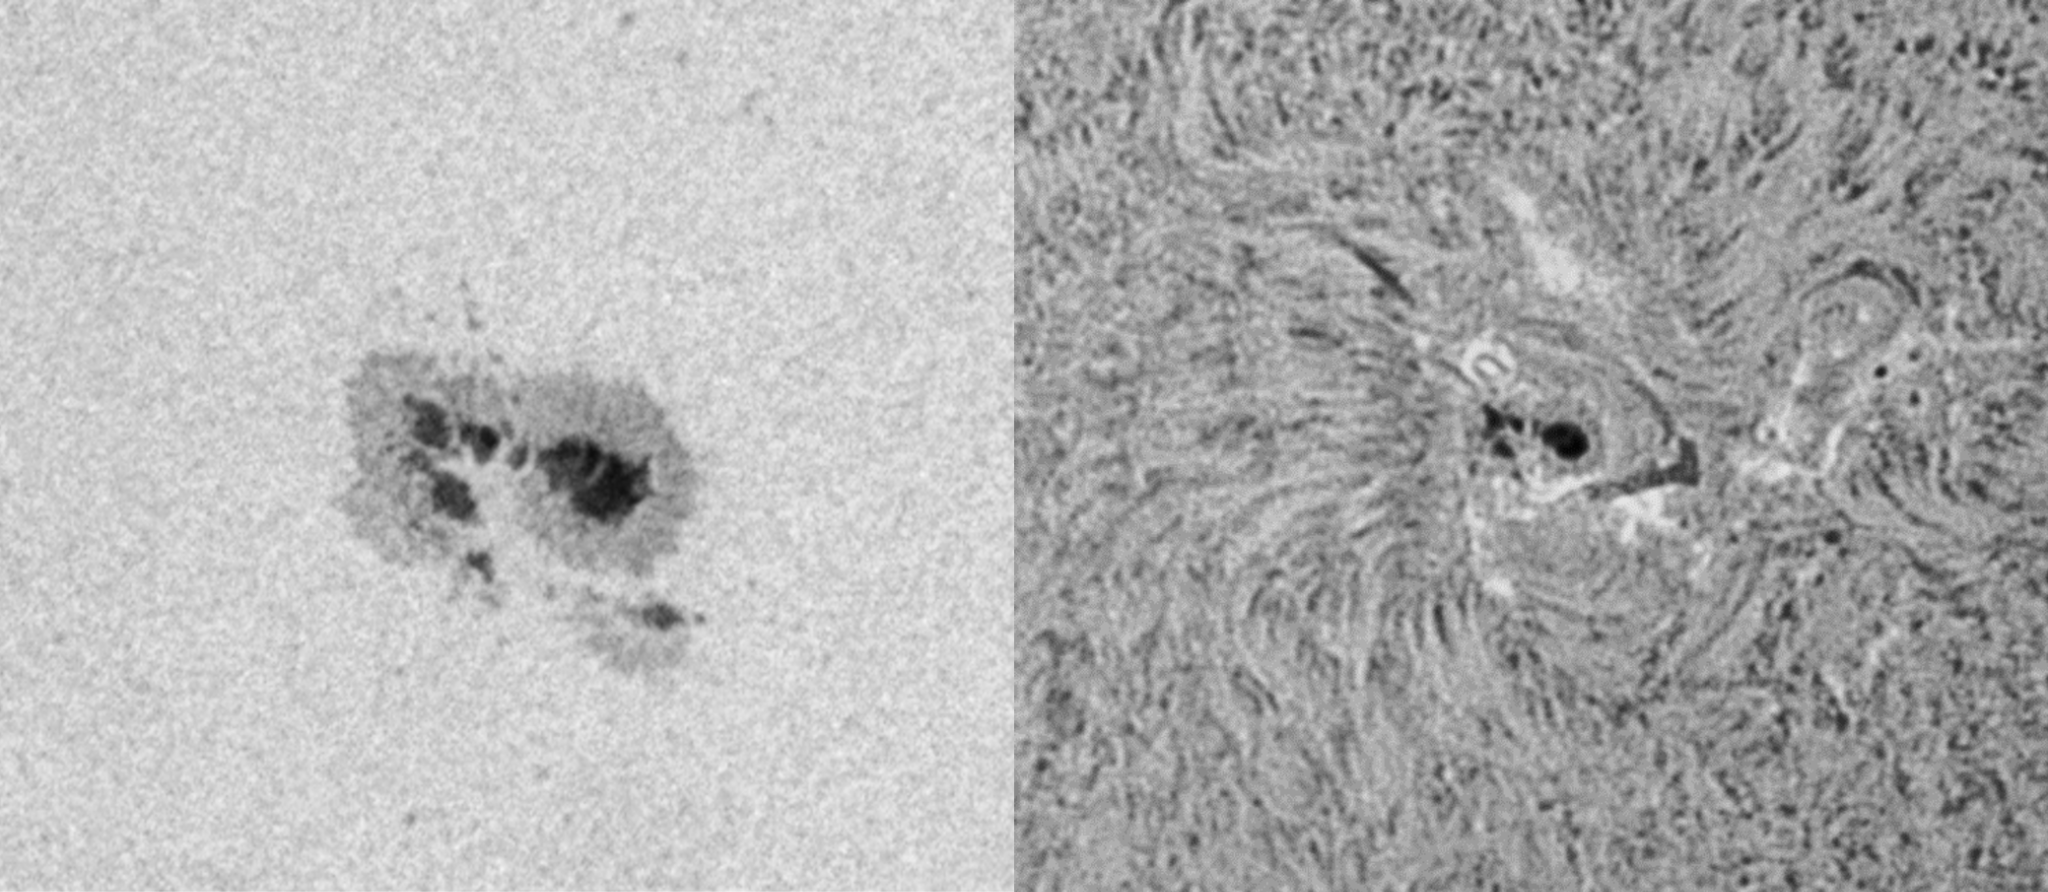 A collage of two large sunspots, side-by-side, shown in black and white.